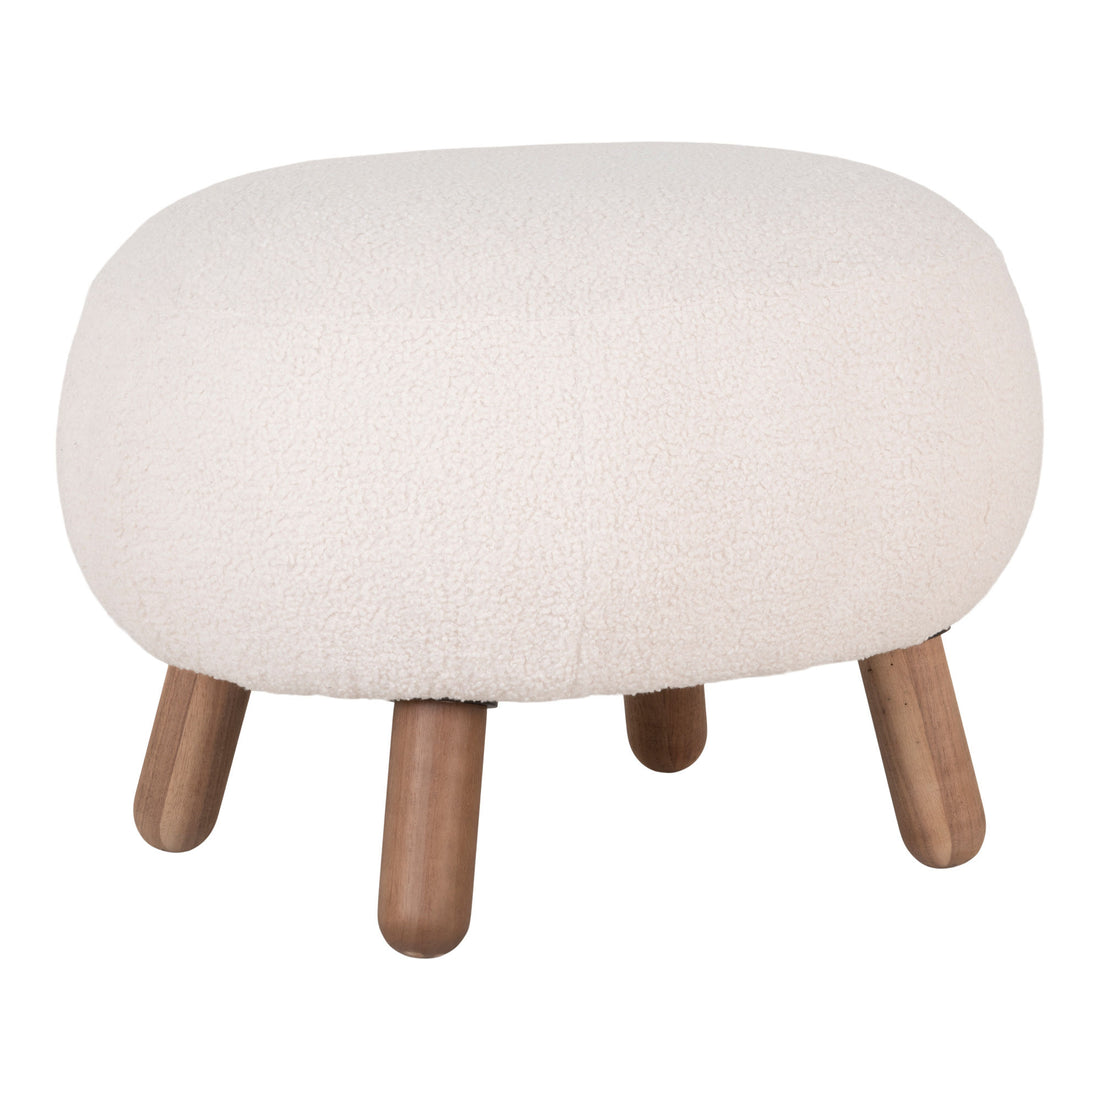 Savona Footstool - Footstool in Artificial Lambskin with Walnut -Colored Ben - 1 - PCS